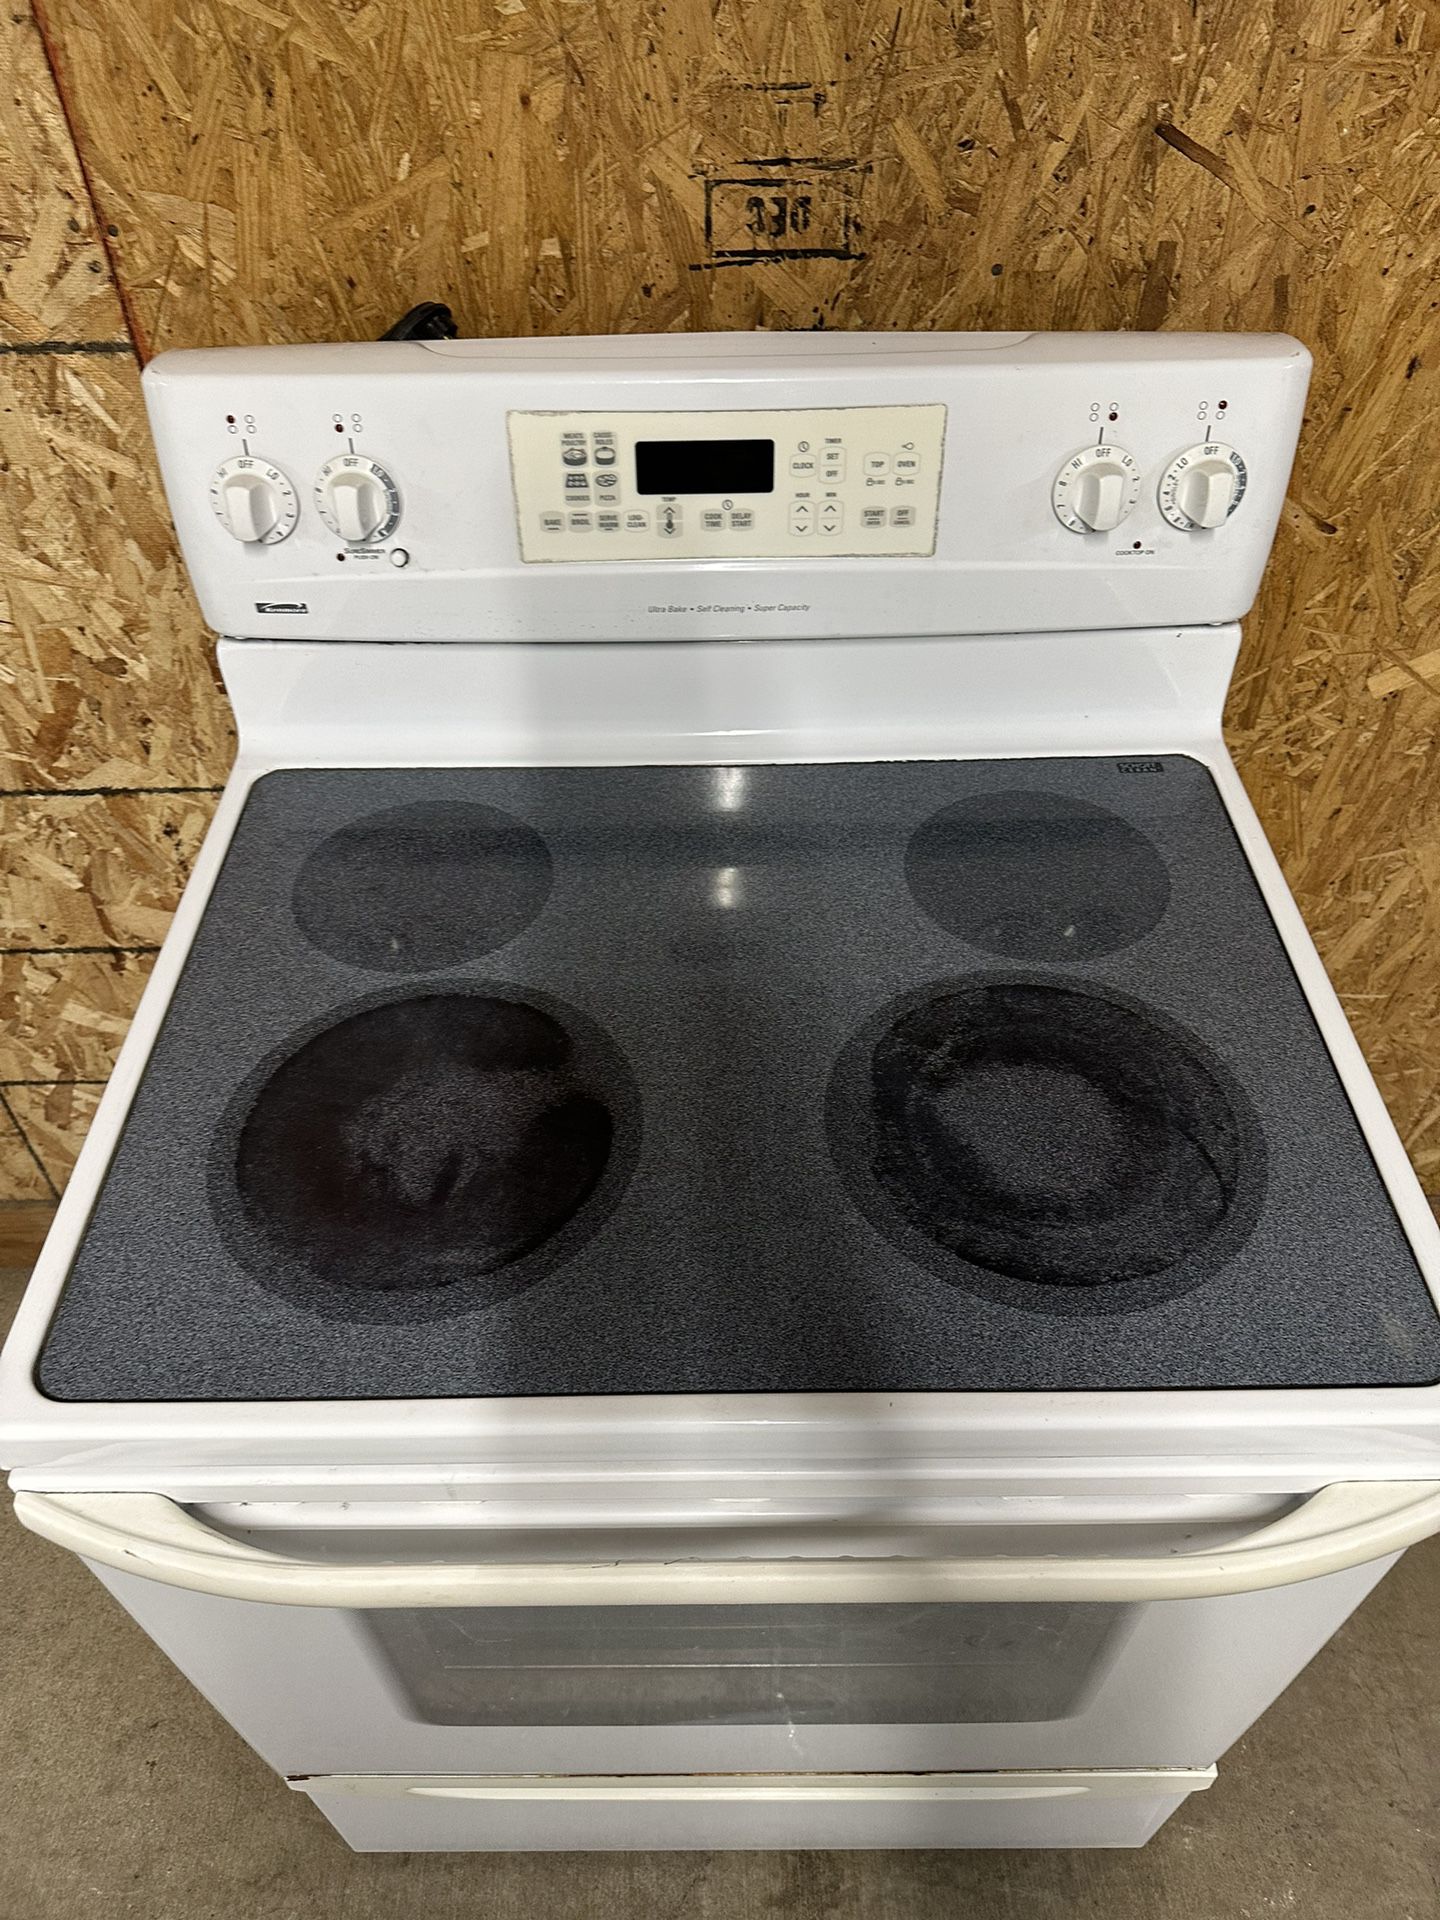 Kenmore-electric-stove